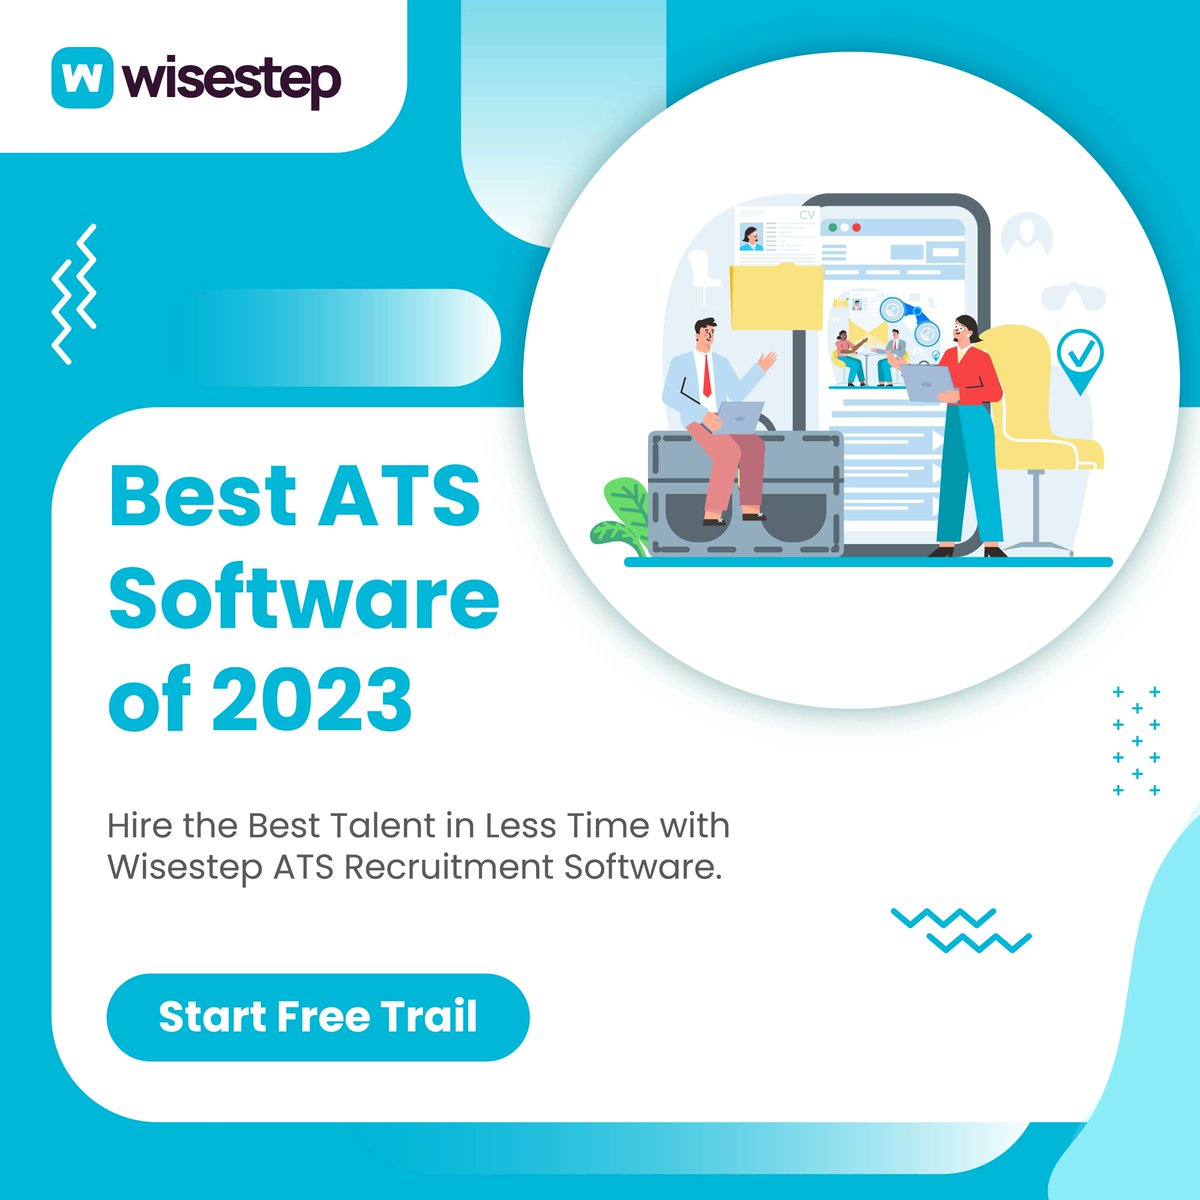 Don't let good candidates slip away! Wisestep ATS enables you to create talent pools and maintain a database of potential hires for future openings

Book a demo now to know more about Wisestep 

buff.ly/3SywYr8

 #recruitment #applicanttracking #talentpool #WisestepATS